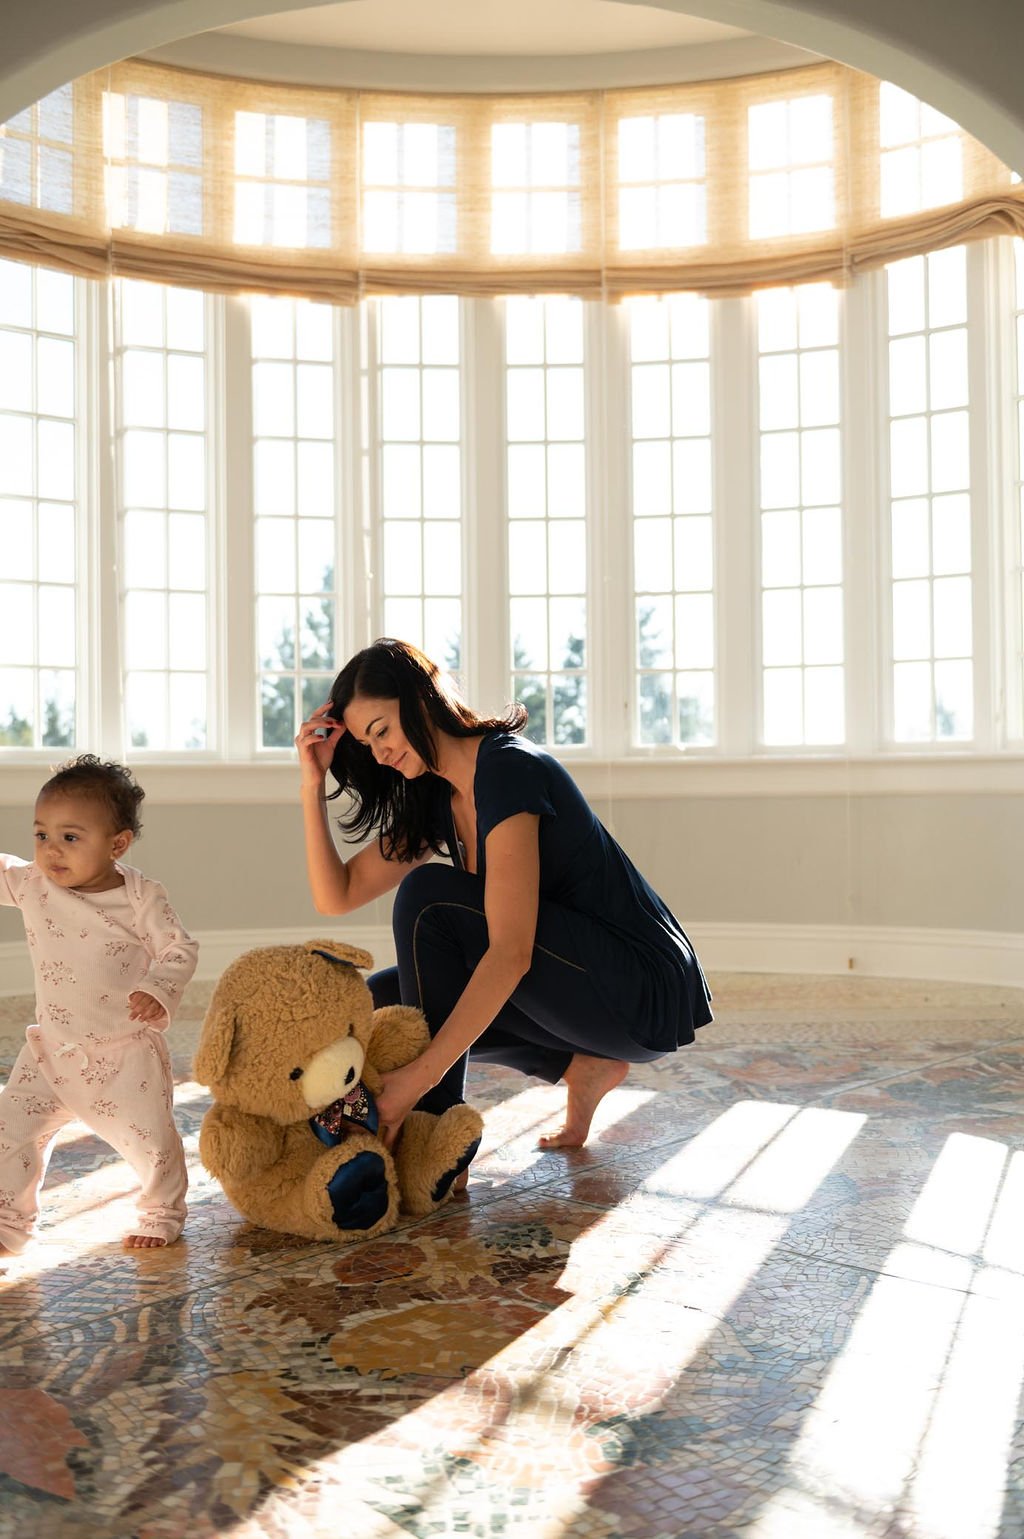 A mother and her child are happily playing with a teddy bear in a cozy room.